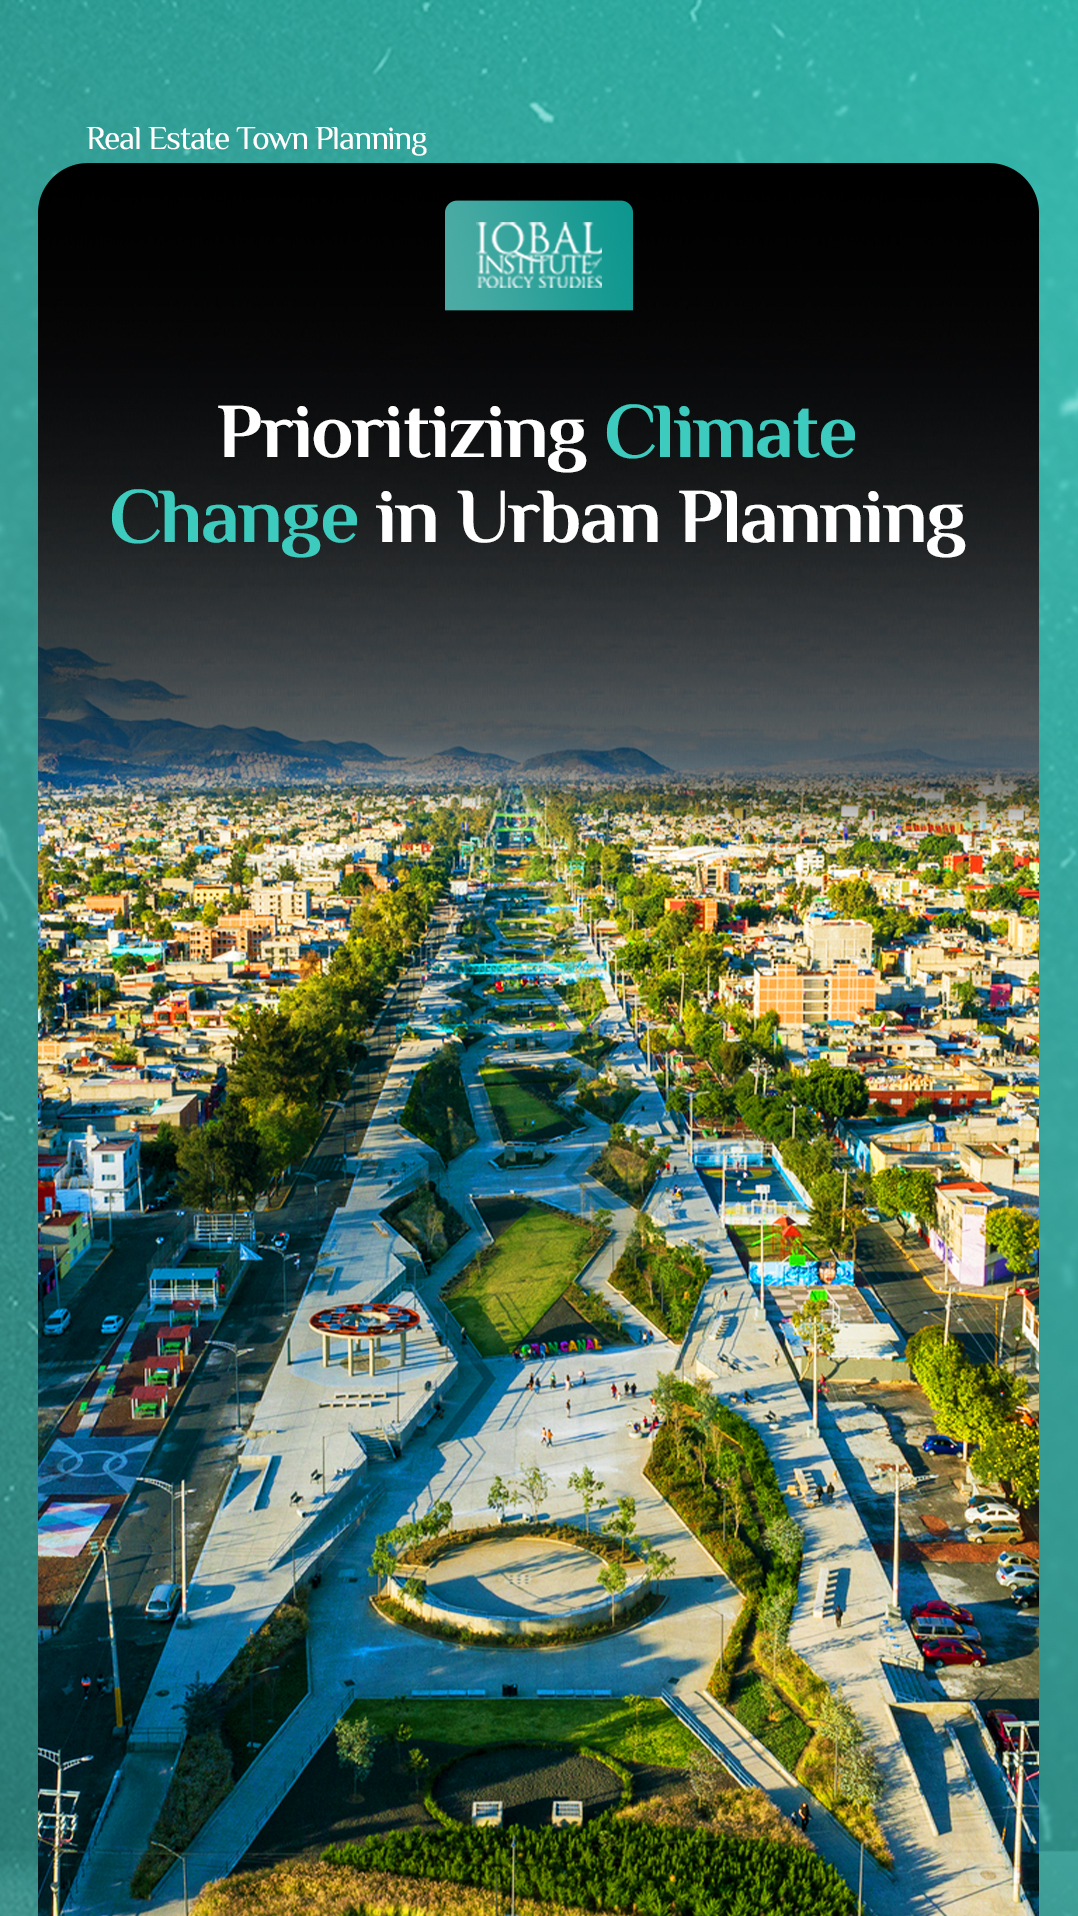 Prioritizing climate change in urban planning